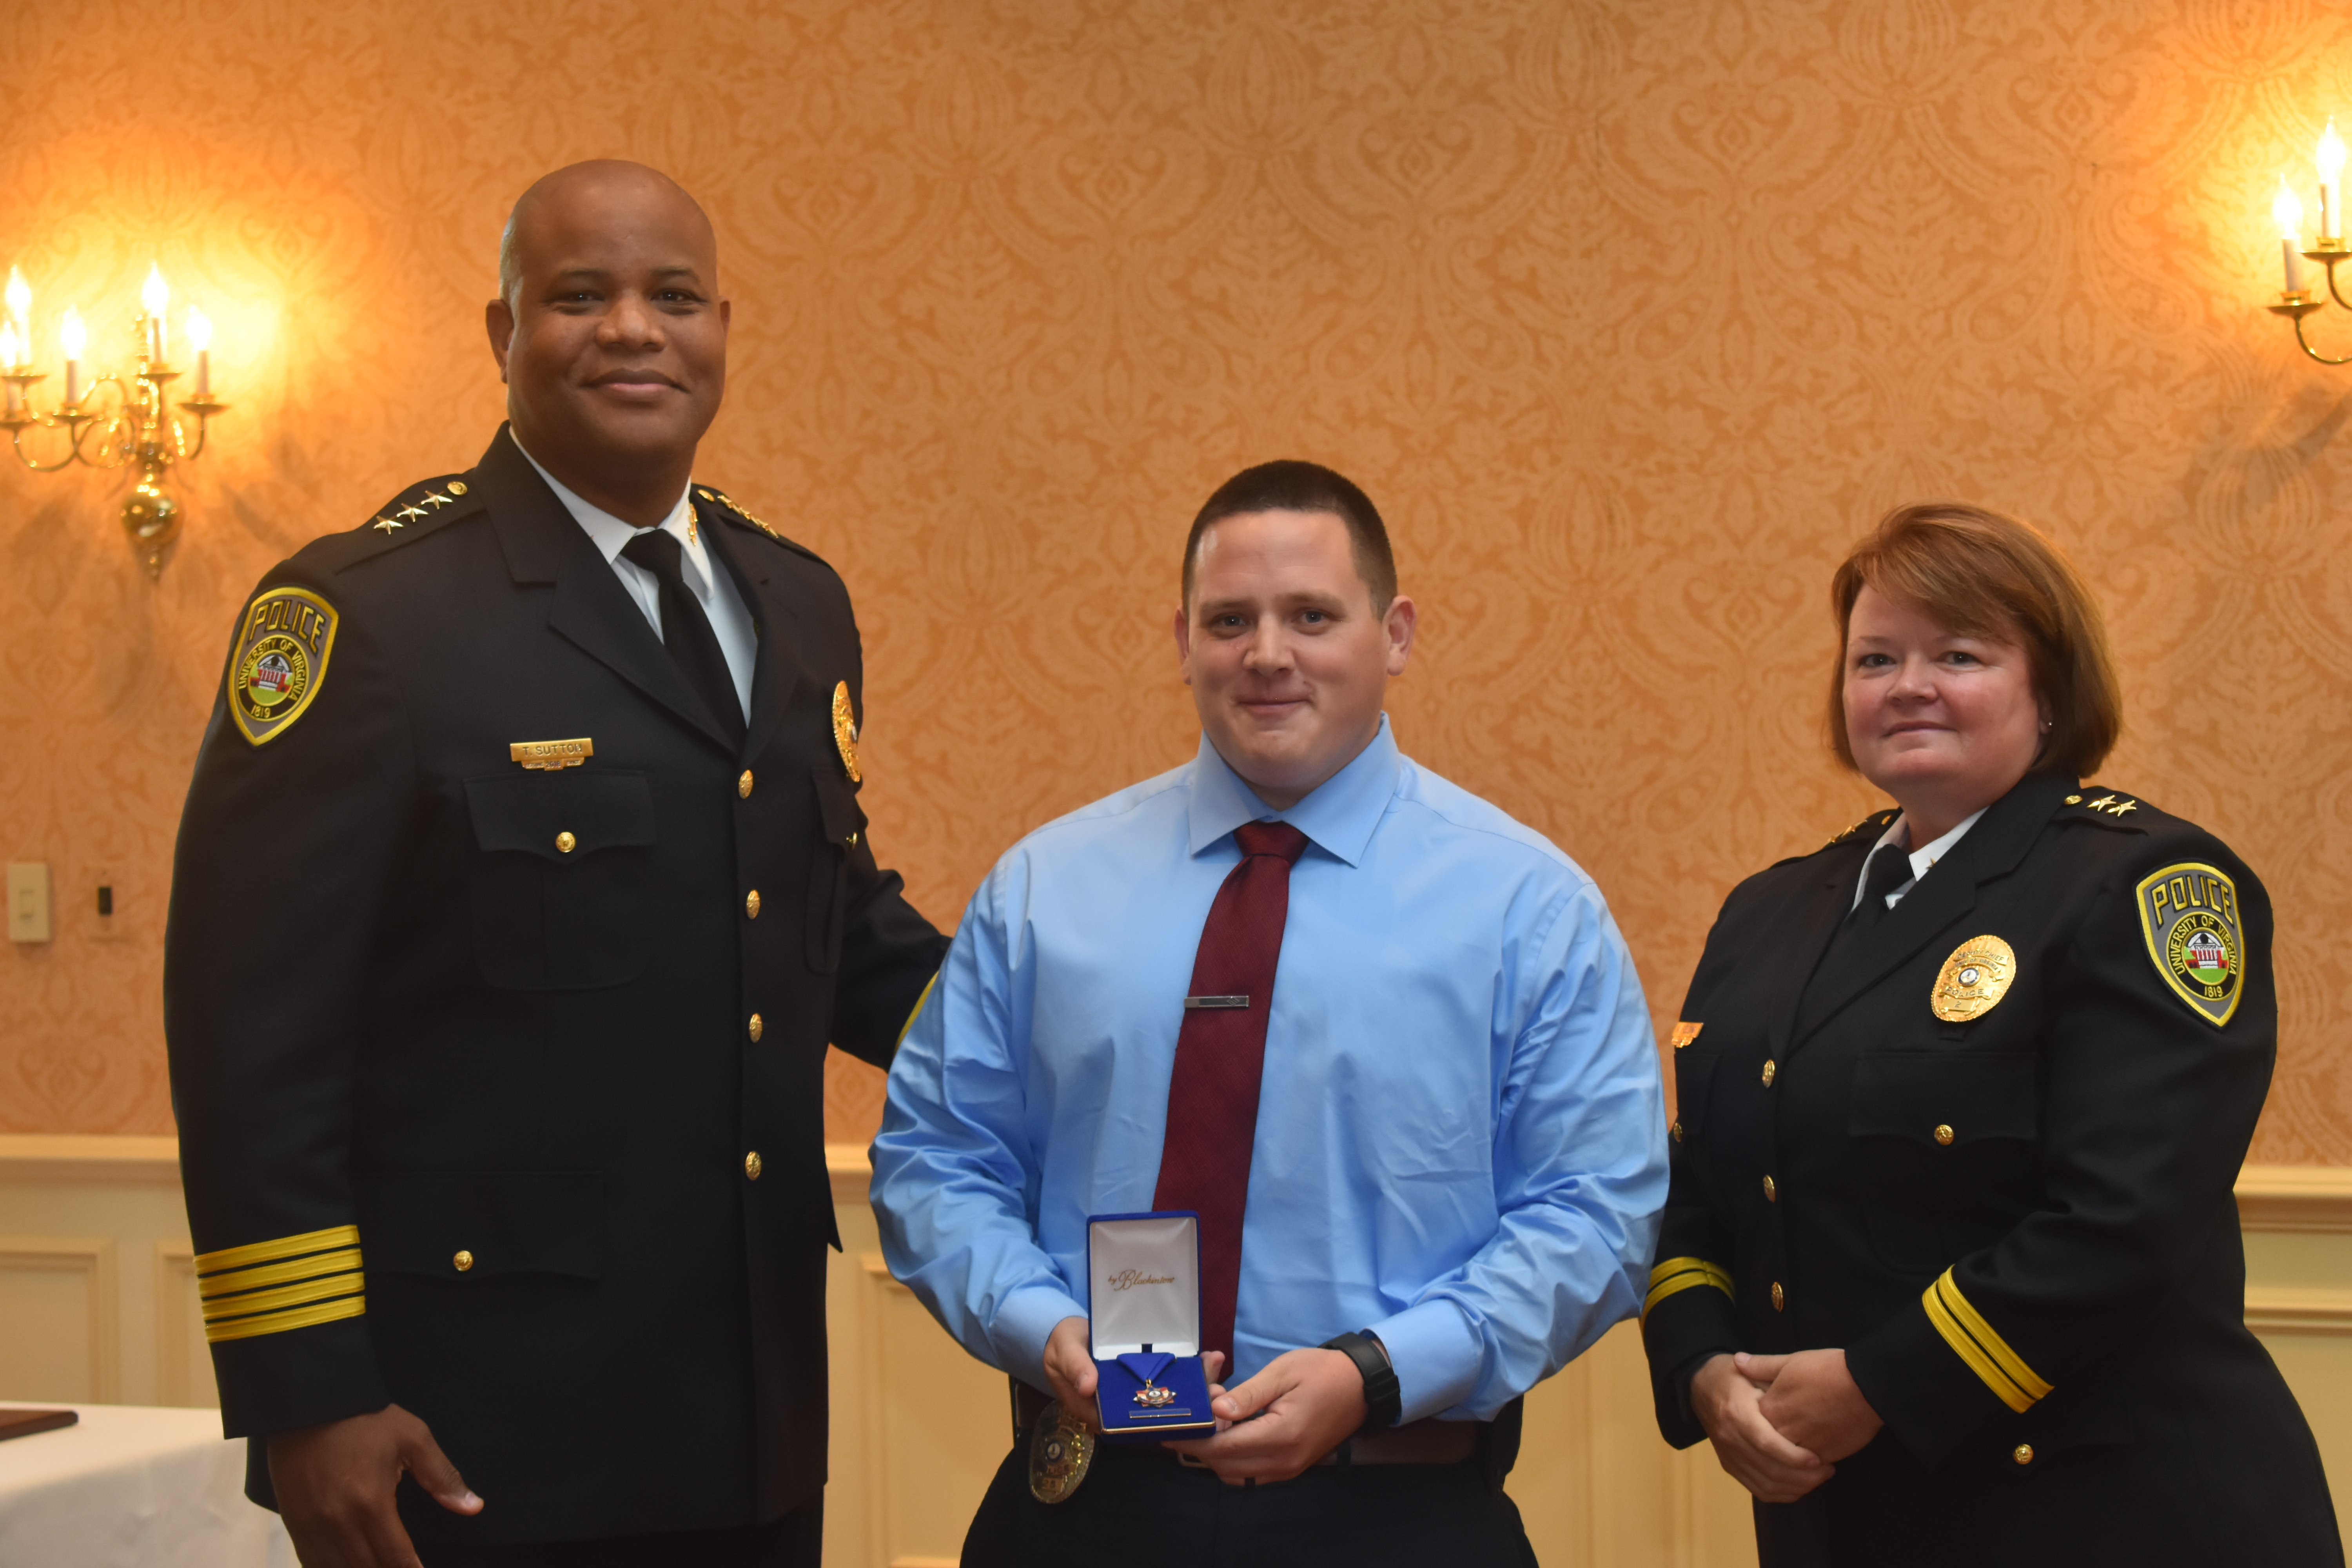 Dean Dotts shows his lifesaving medal flanked by Chief Sutton and Deputy Chief Fielding.